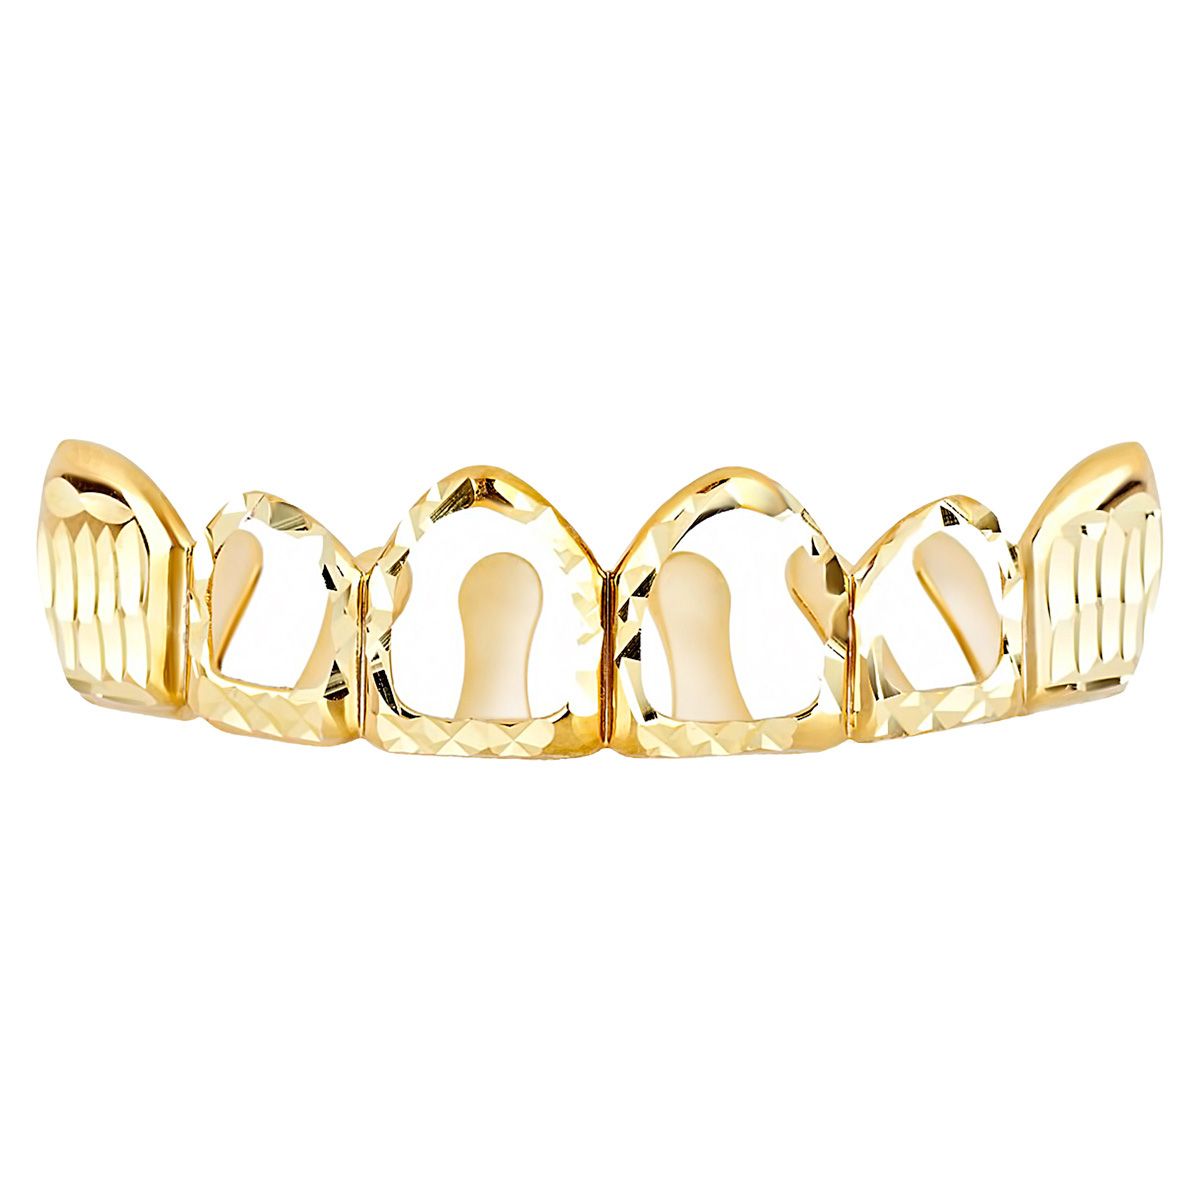 Gold Diamond Cut Grillz – One size fits all – HOLLOW Top